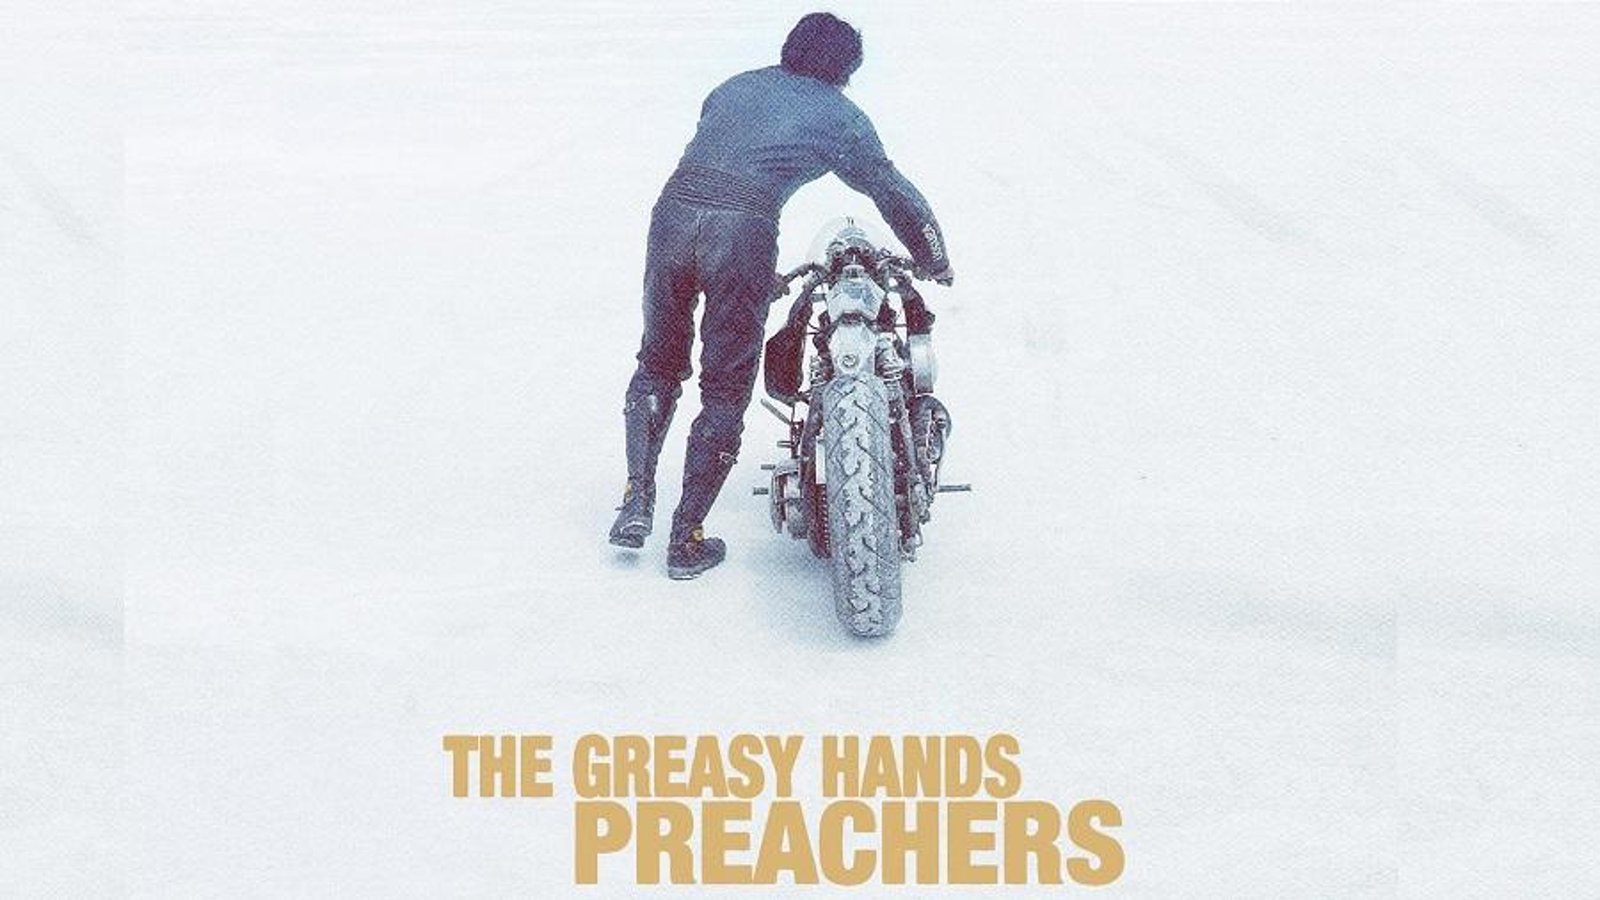 The Greasy Hands Preachers - Motorcycle Enthusiasts Across the Globe